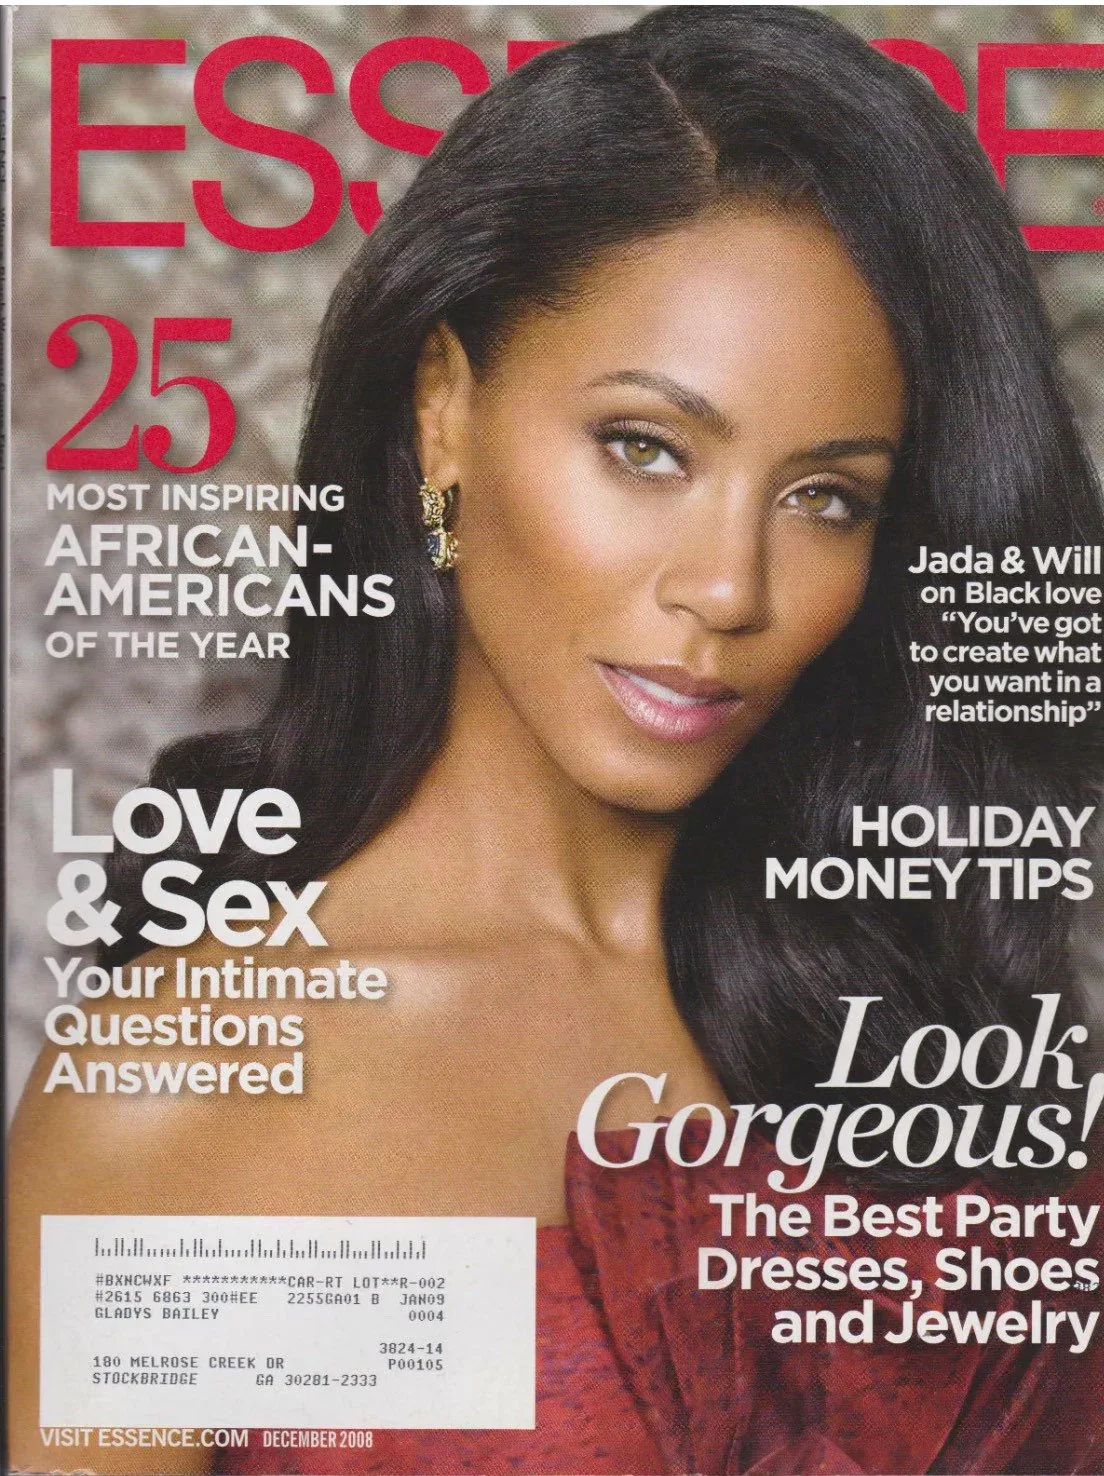 11 Times Jada Pinkett-Smith Totally Slayed The Cover Of ESSENCE